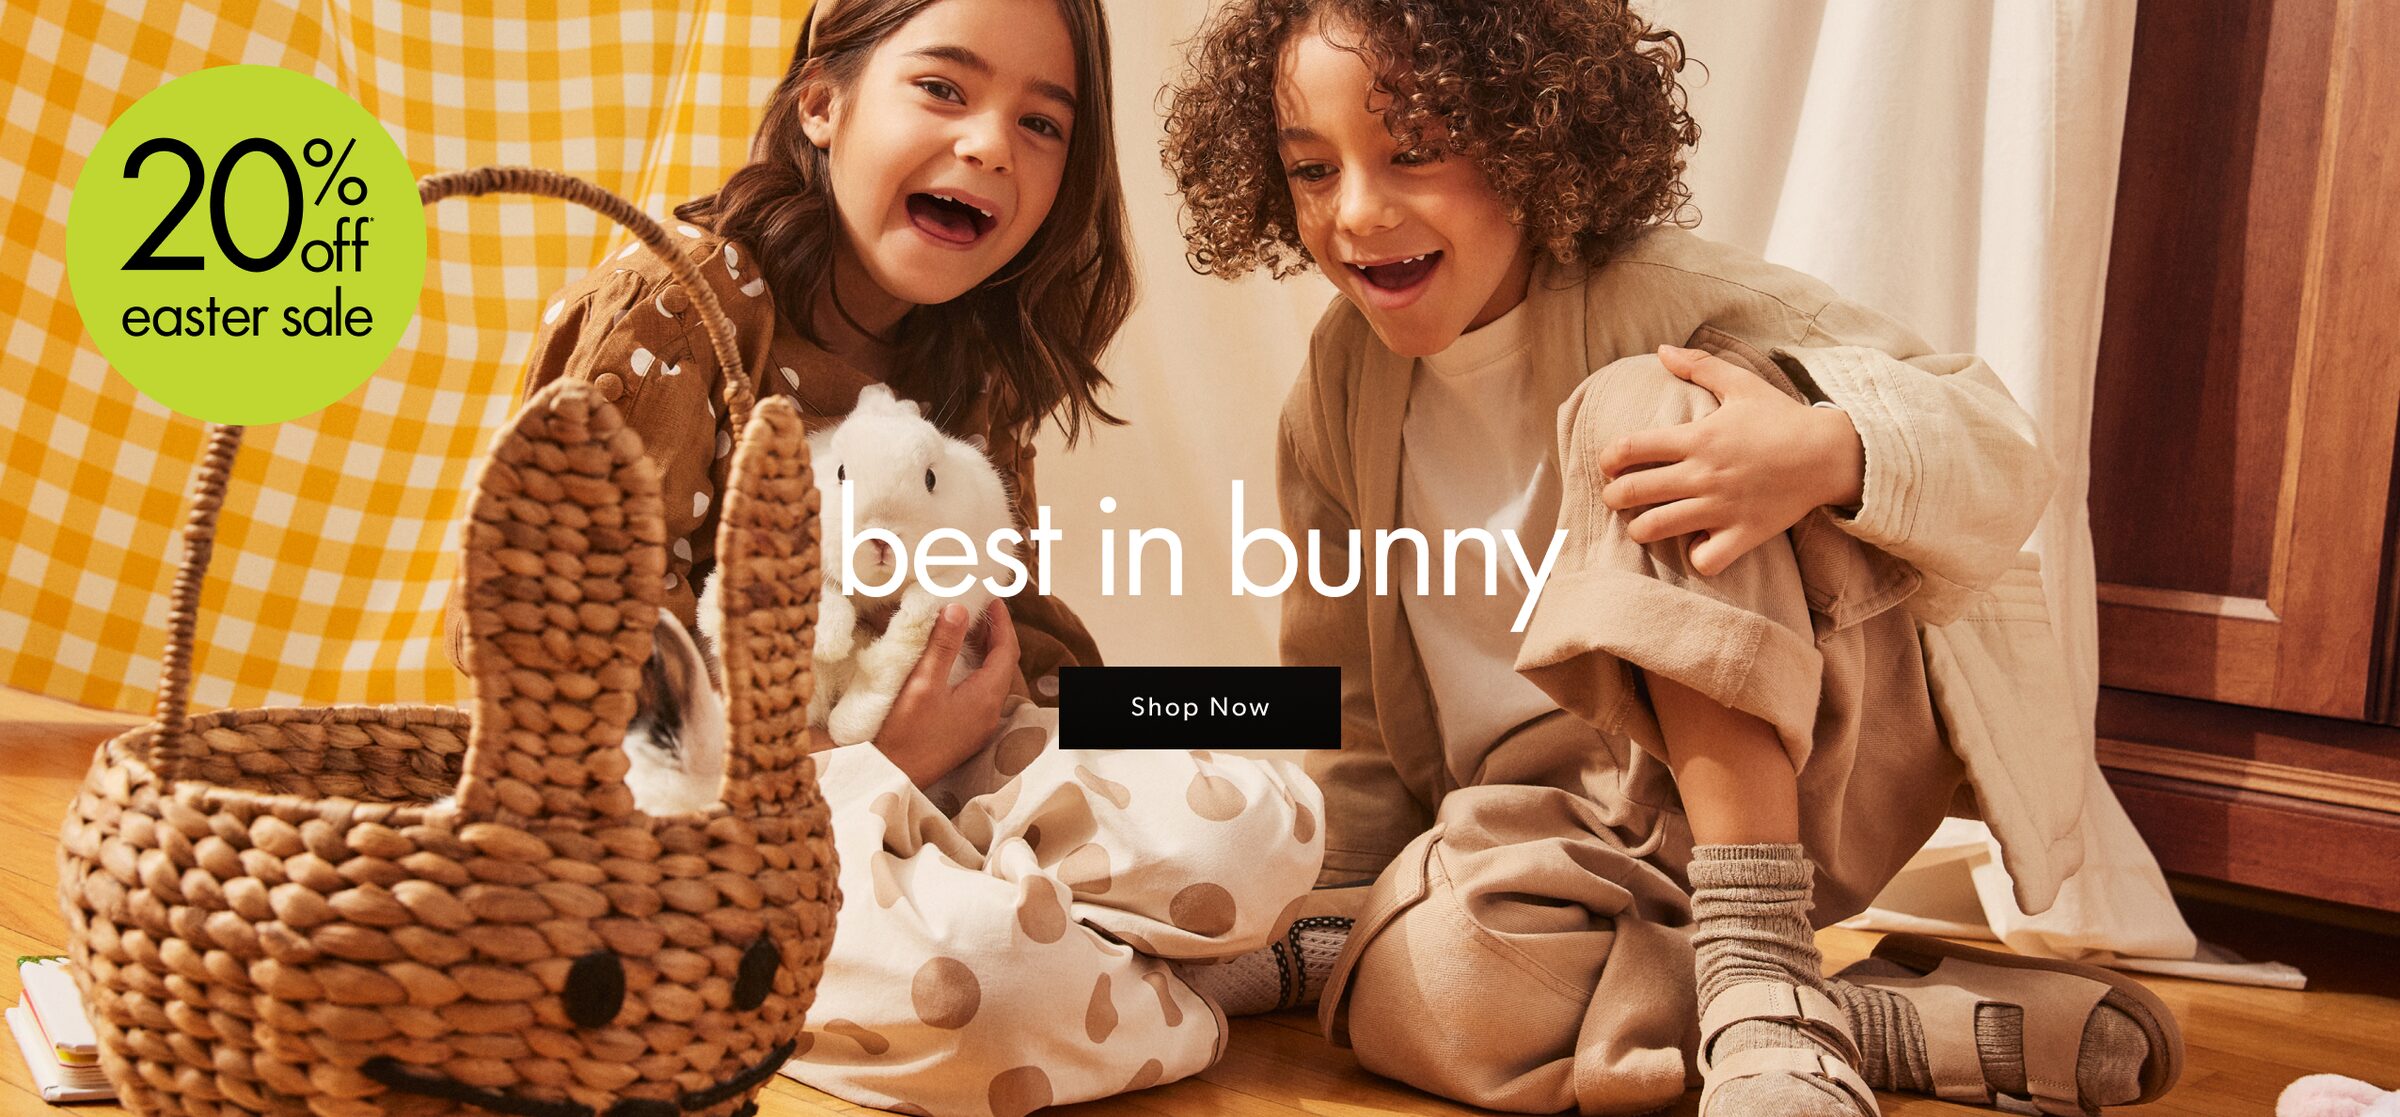 Children sitting next to an Easter basket while holding a bunny.